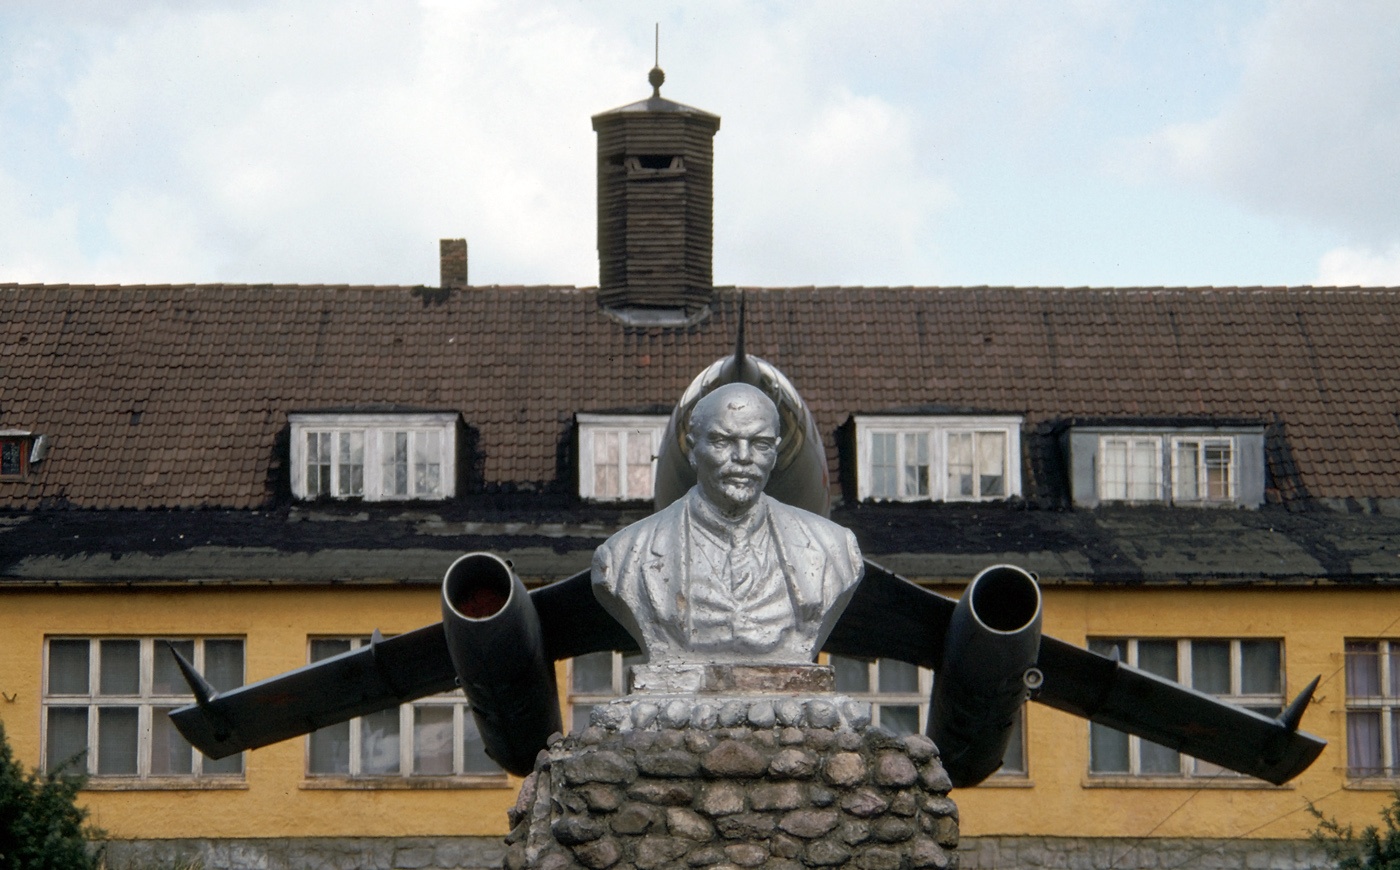 In front of the HQ buildings at Werneuchen Lenin was still honoured with a statue. Behind him a Yak 27 by Rob Schleiffert